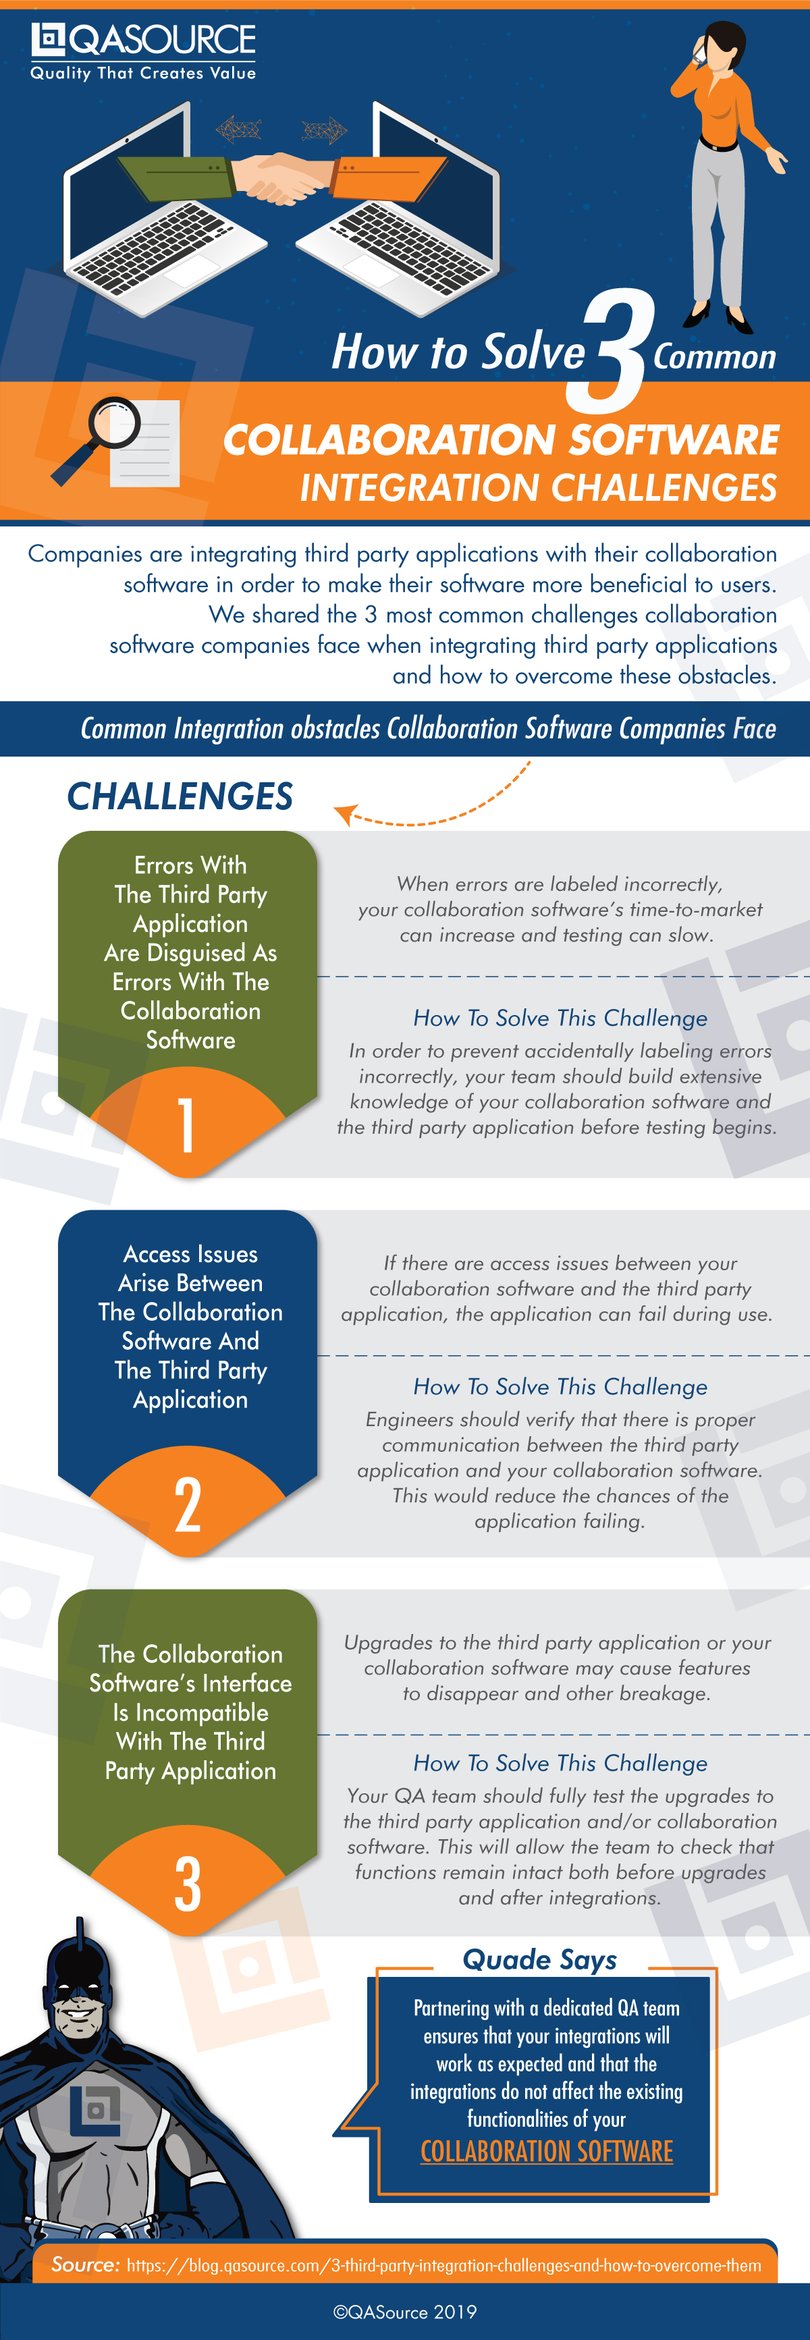 How to Solve 3 Common Collaboration Software Integration Challenges (Infographic)